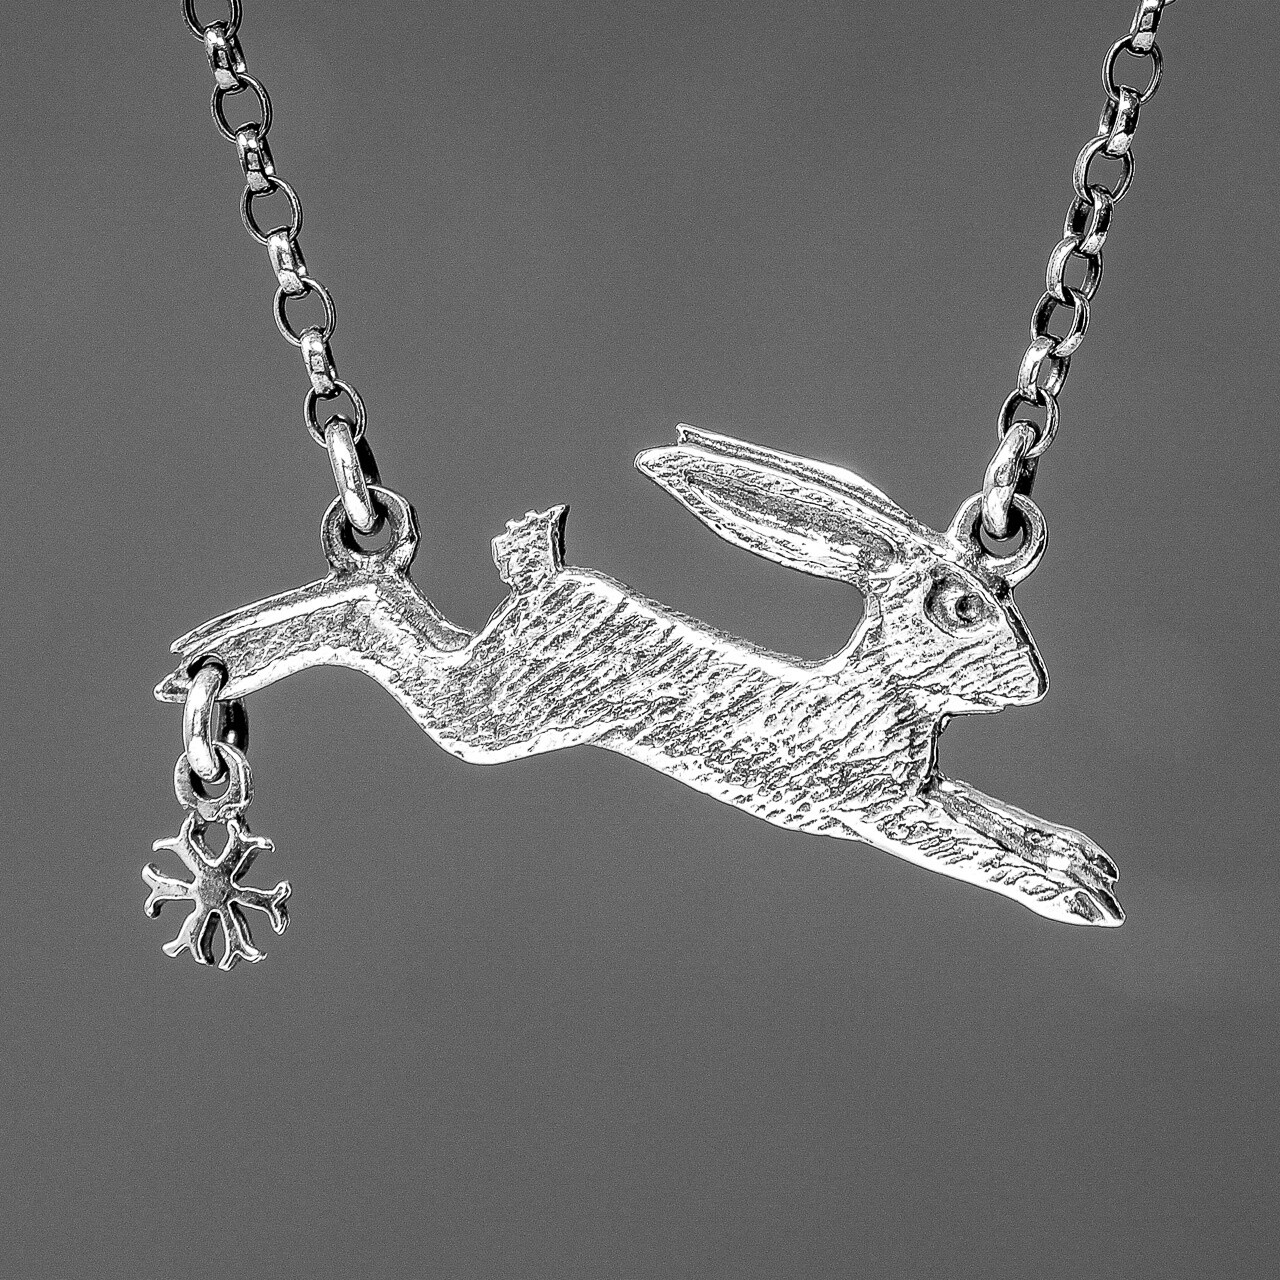 Magical Winter Hare Silver Pendant by Nick Hubbard